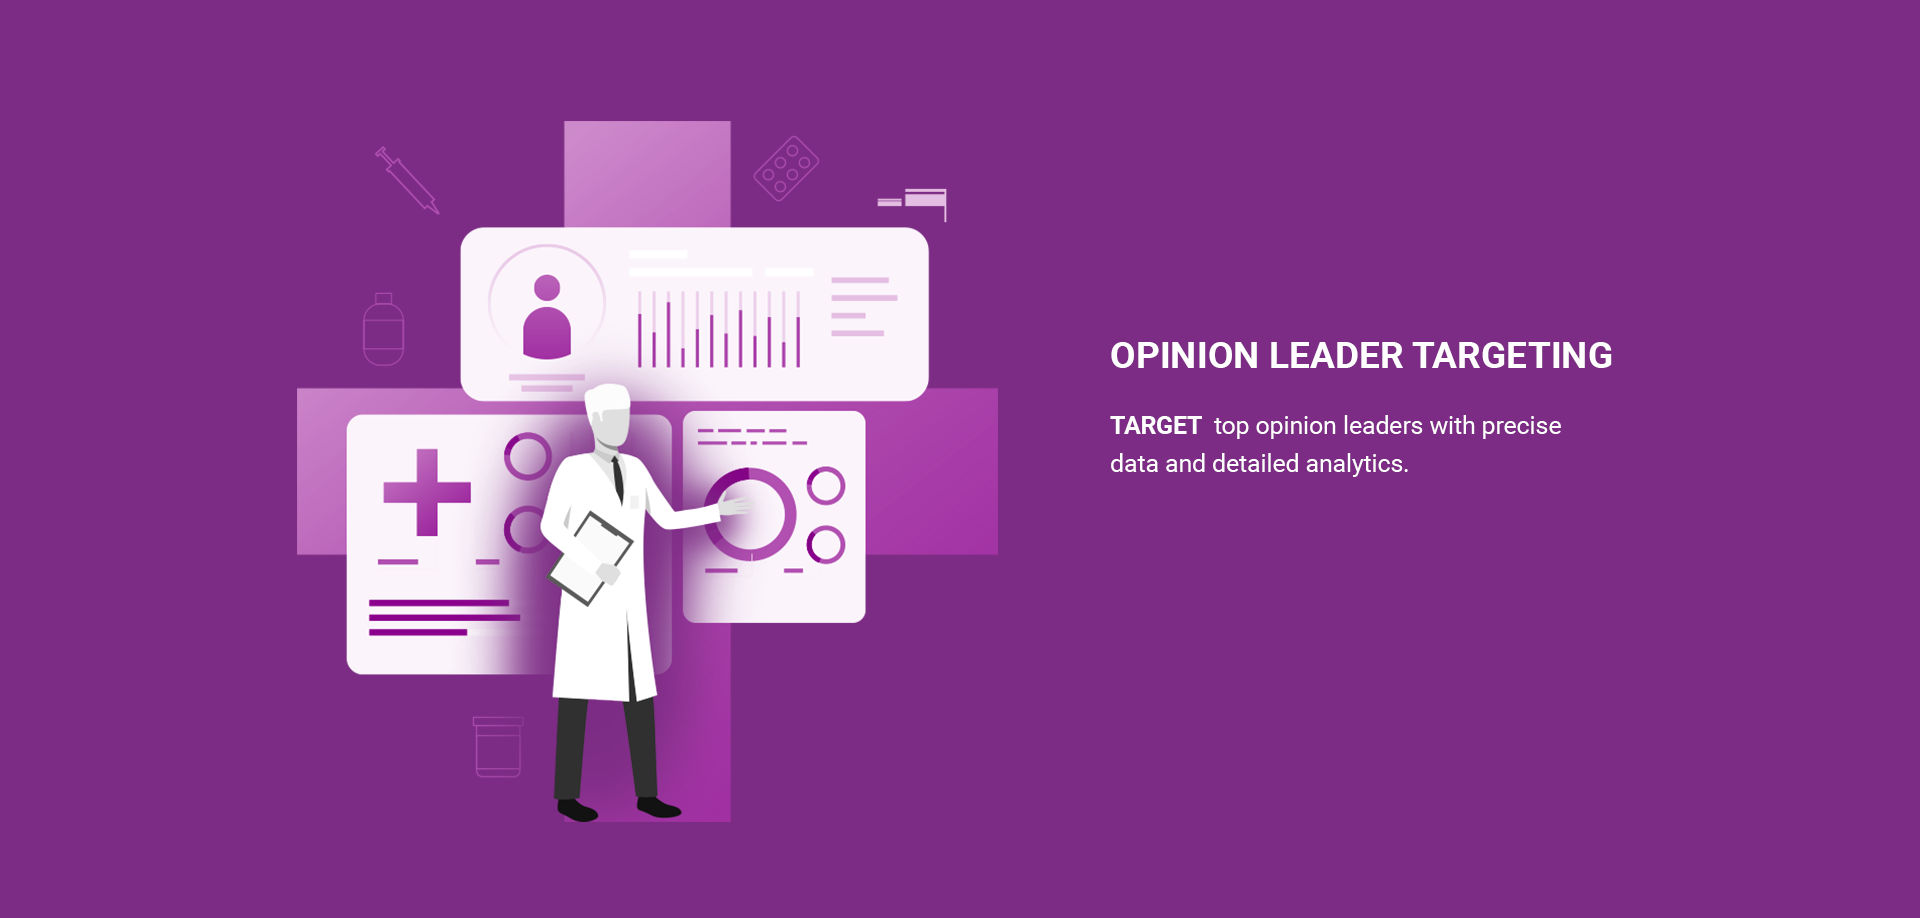 Purple graphic depicting a healthcare professional with medical charts and icons, accompanied by the text "OPINION LEADER TARGETING."